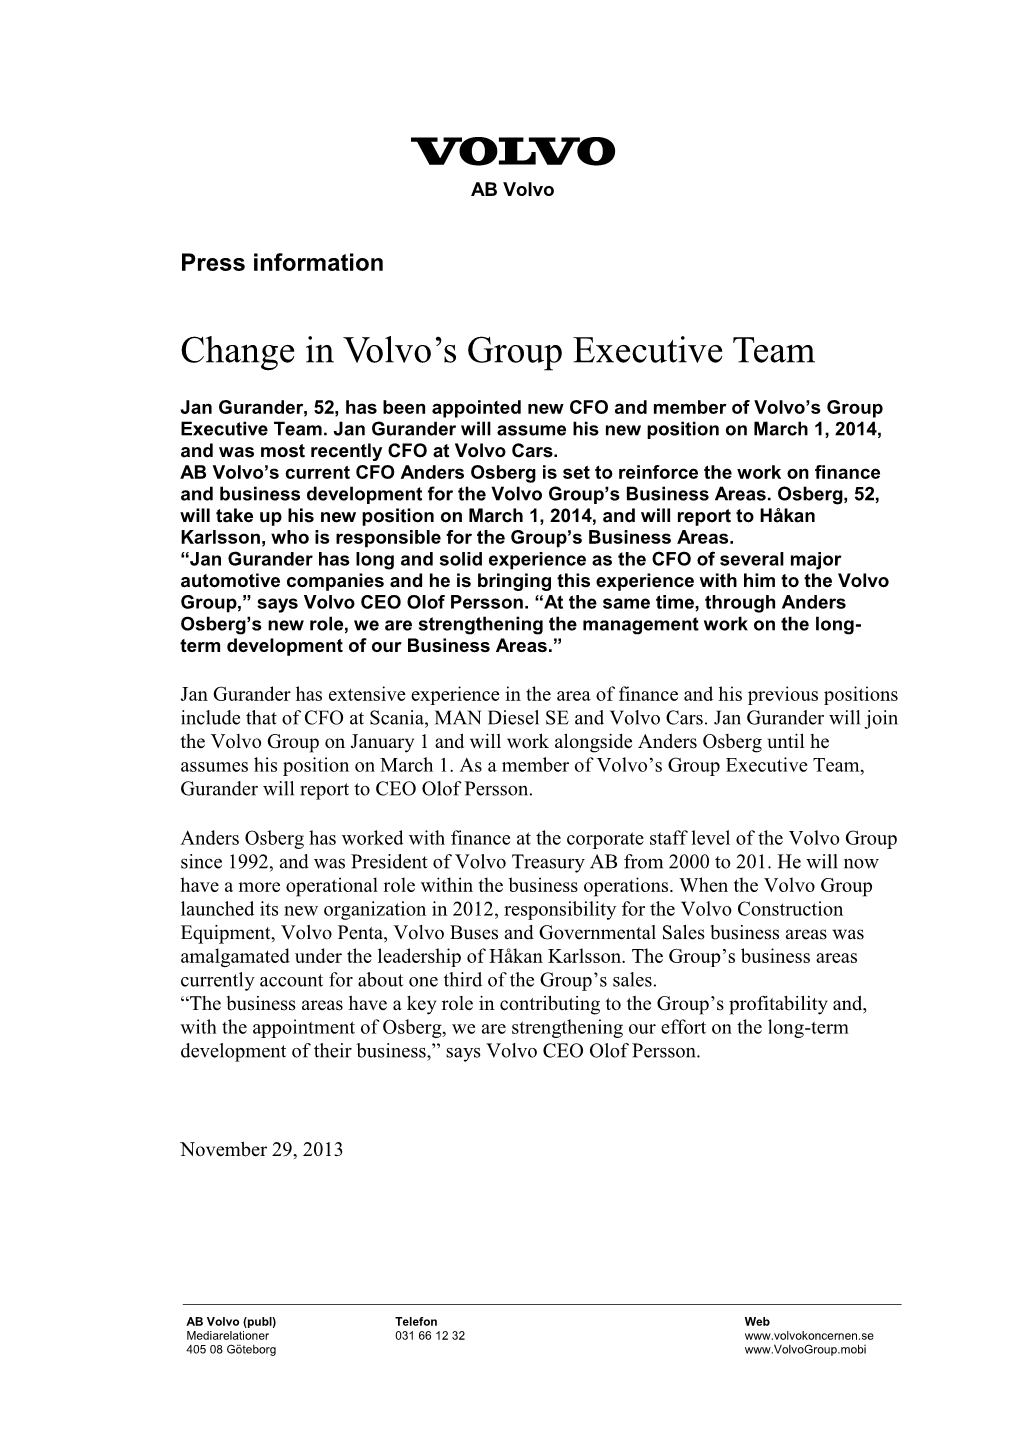 Change in Volvo's Group Executive Team